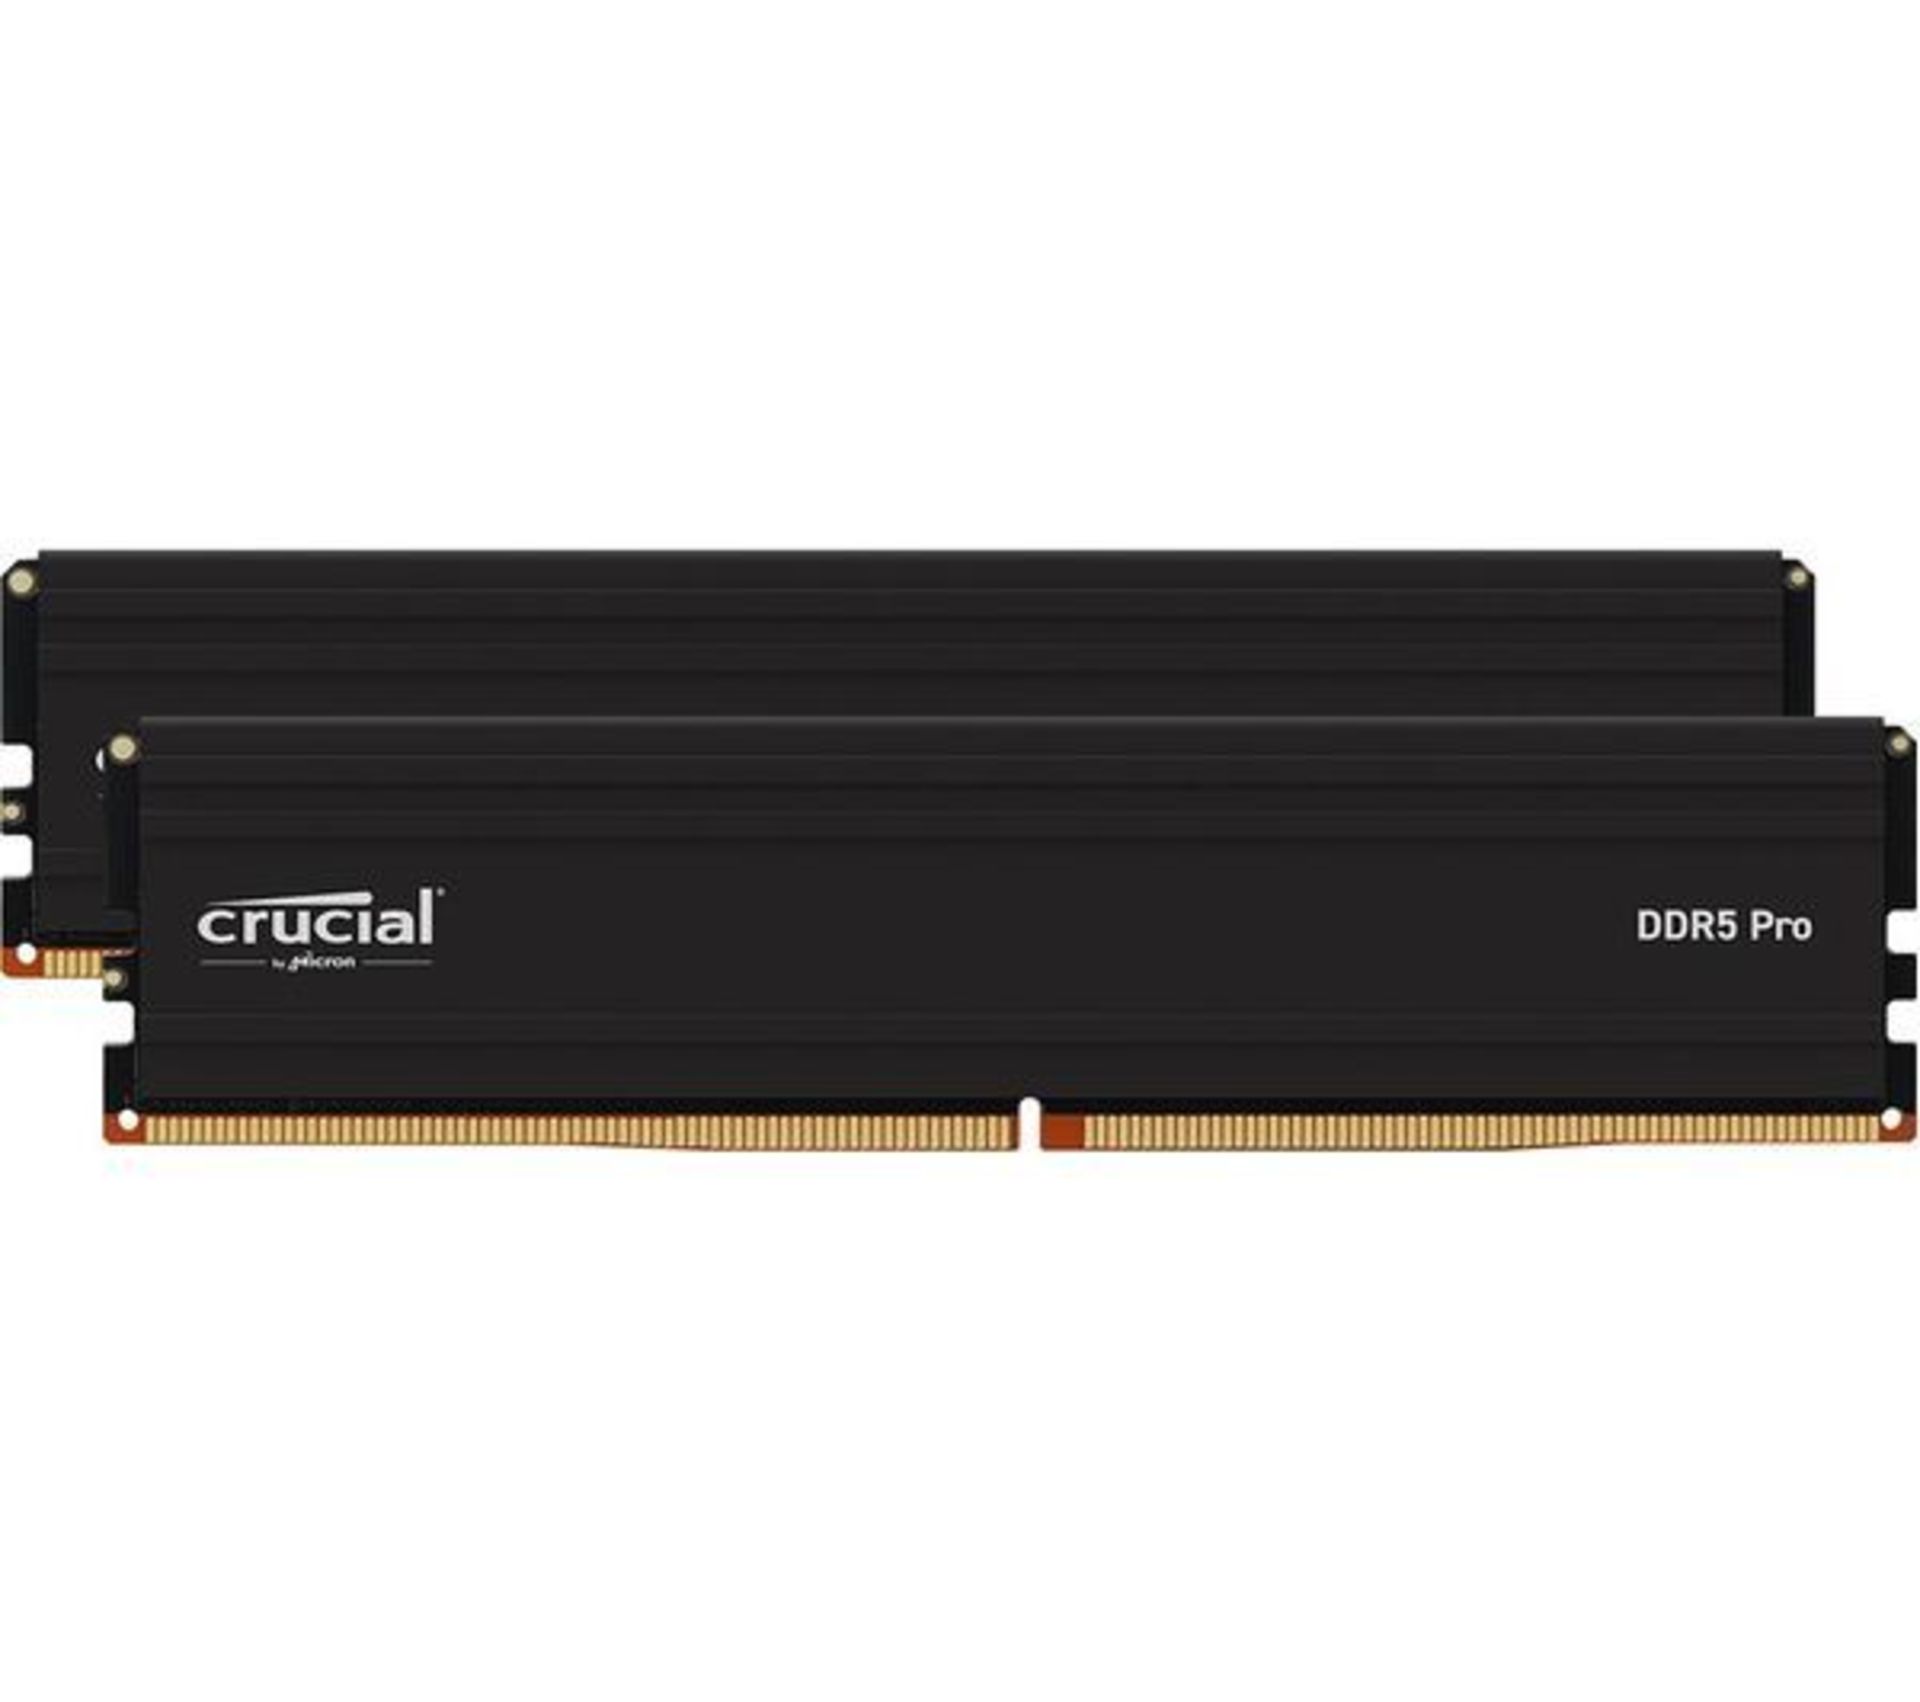 CRUCIAL DDR5 5600 MHz PC RAM - 16 GB x 2. - P2. Give your PC a boost with 32 GB of DDR5 RAM – with